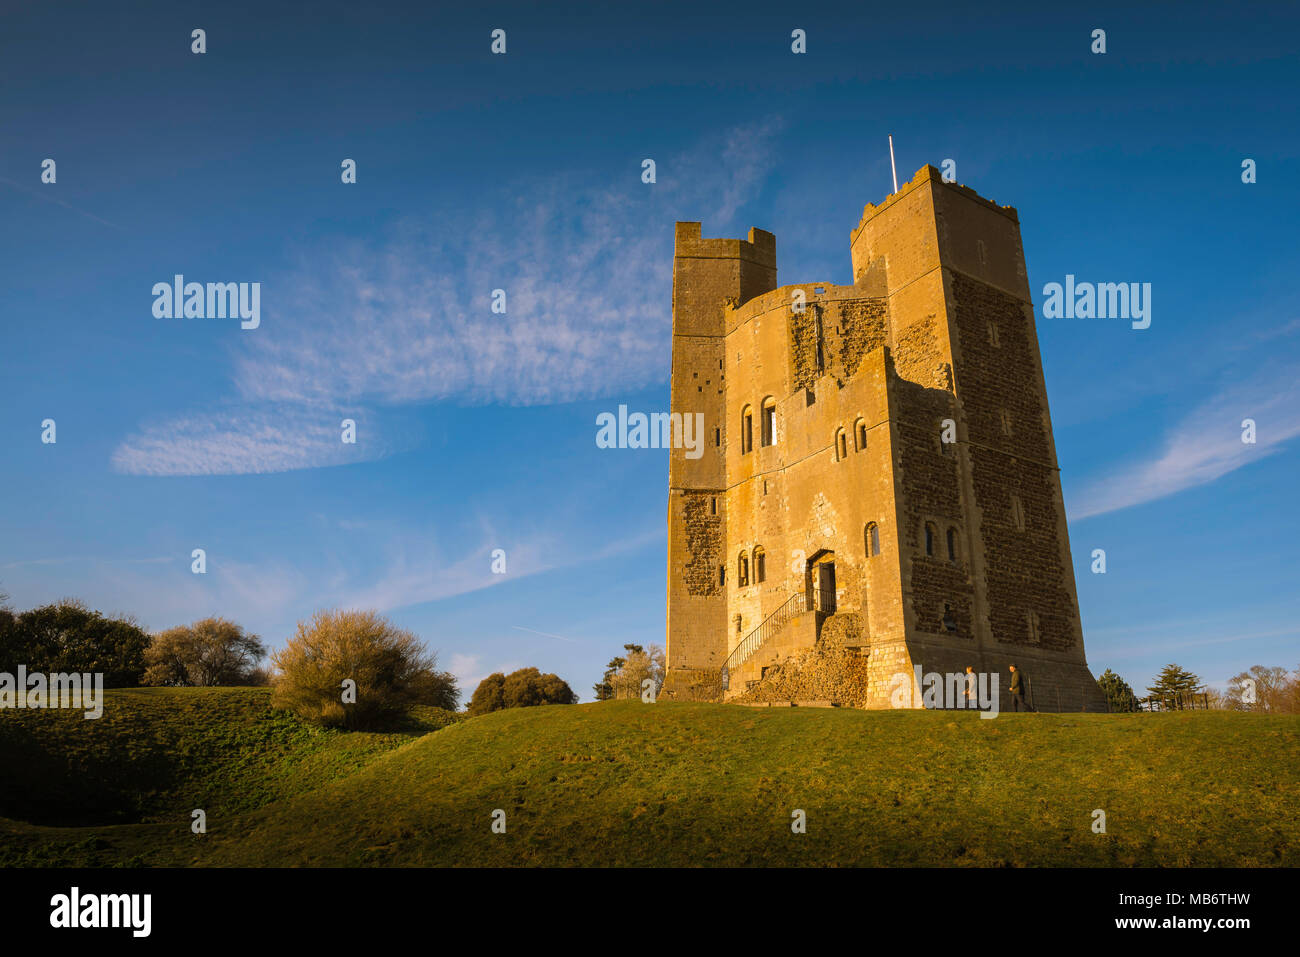 Castle UK, view at sunset of the well preserved 12th Century castle keep  in Orford, Suffolk, England. Stock Photo